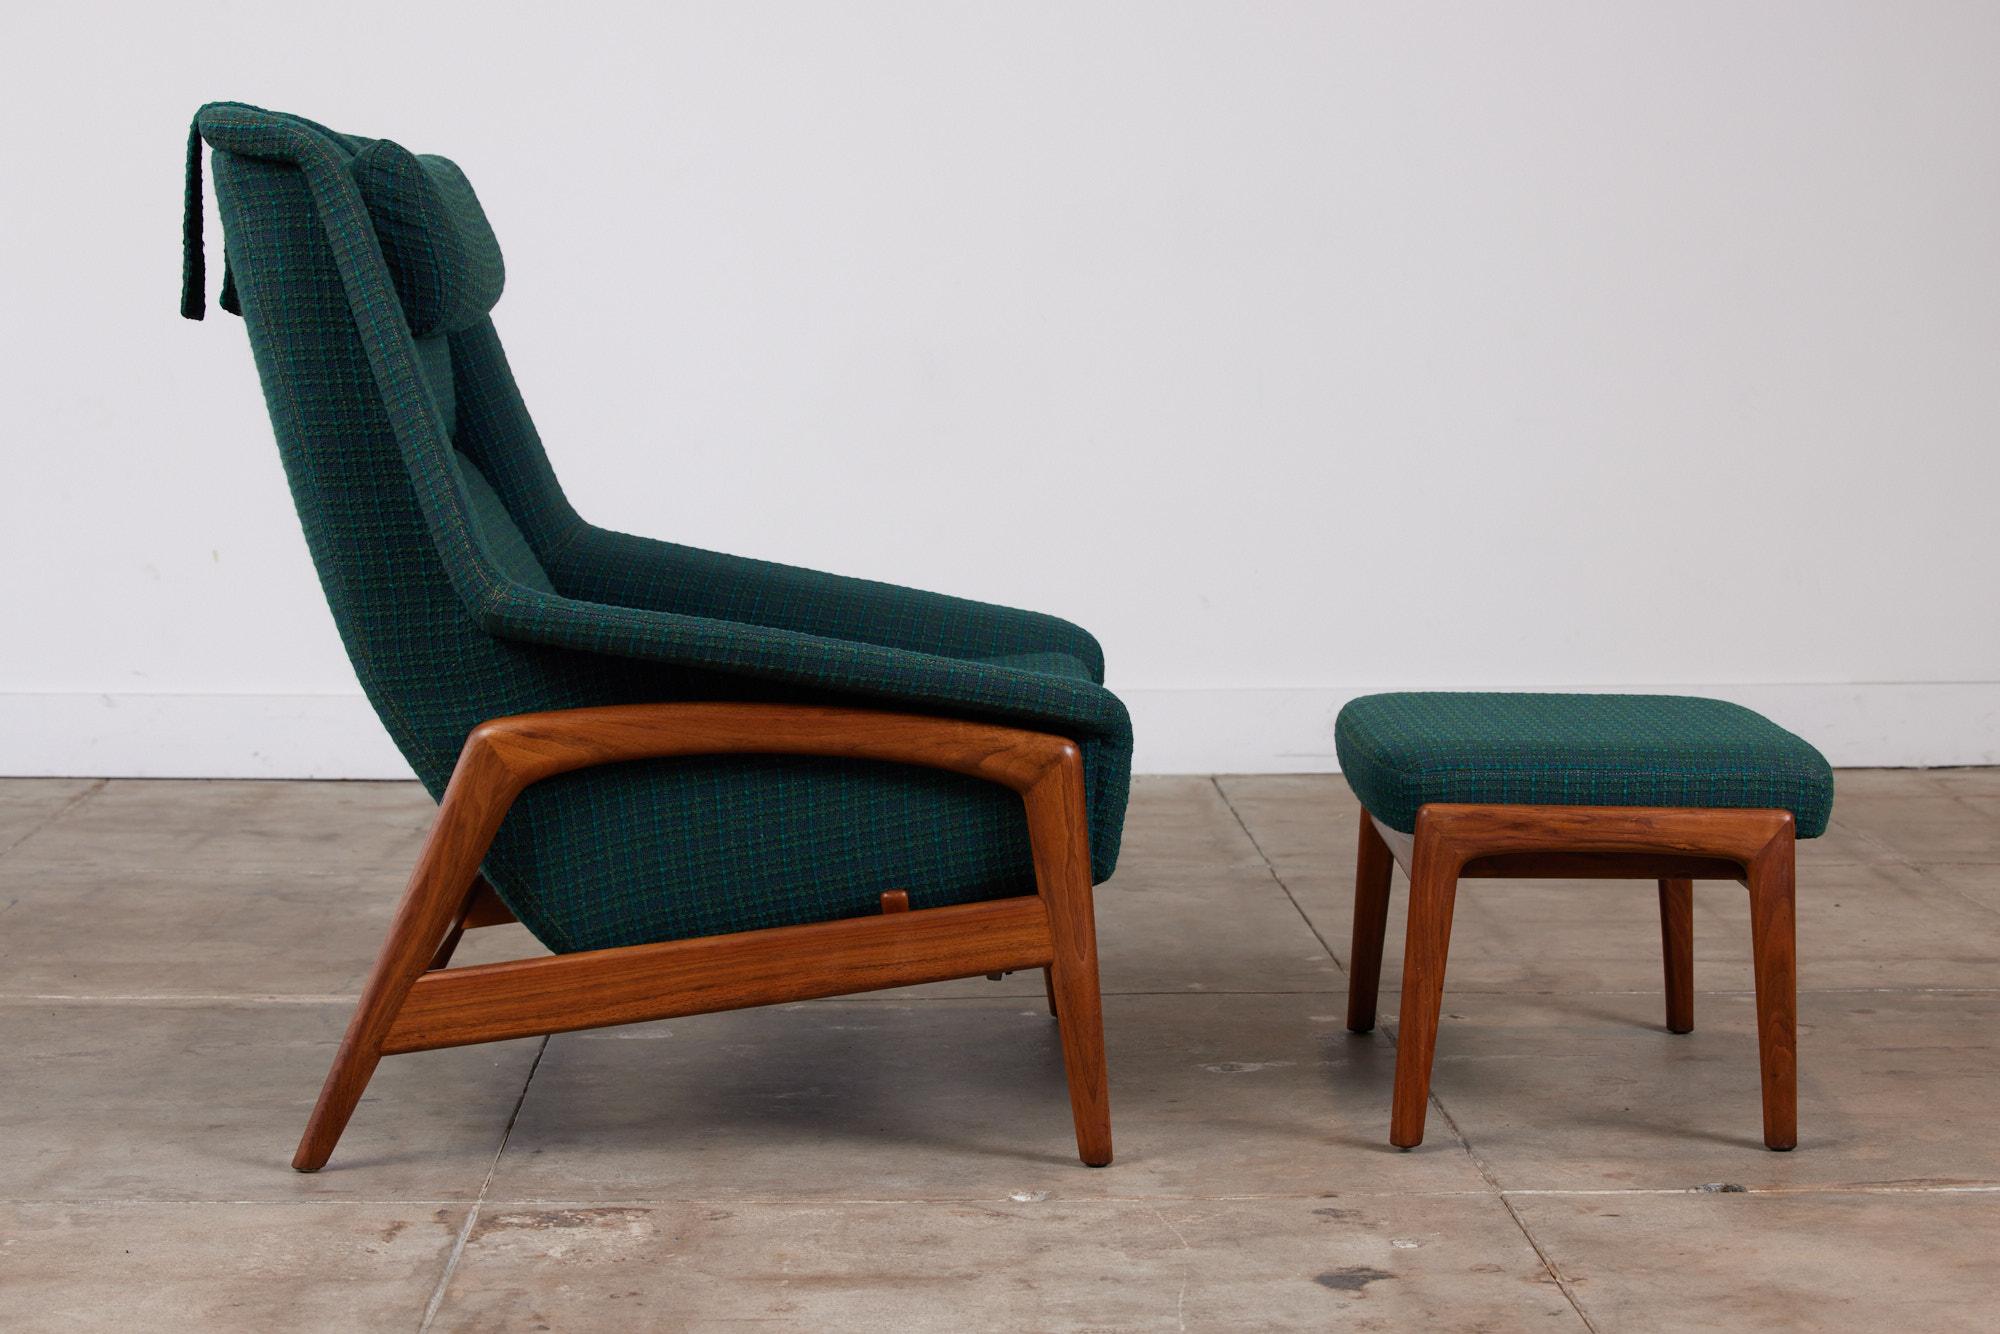 Upholstery Folke Ohlsson Lounge Chair and Ottoman for DUX